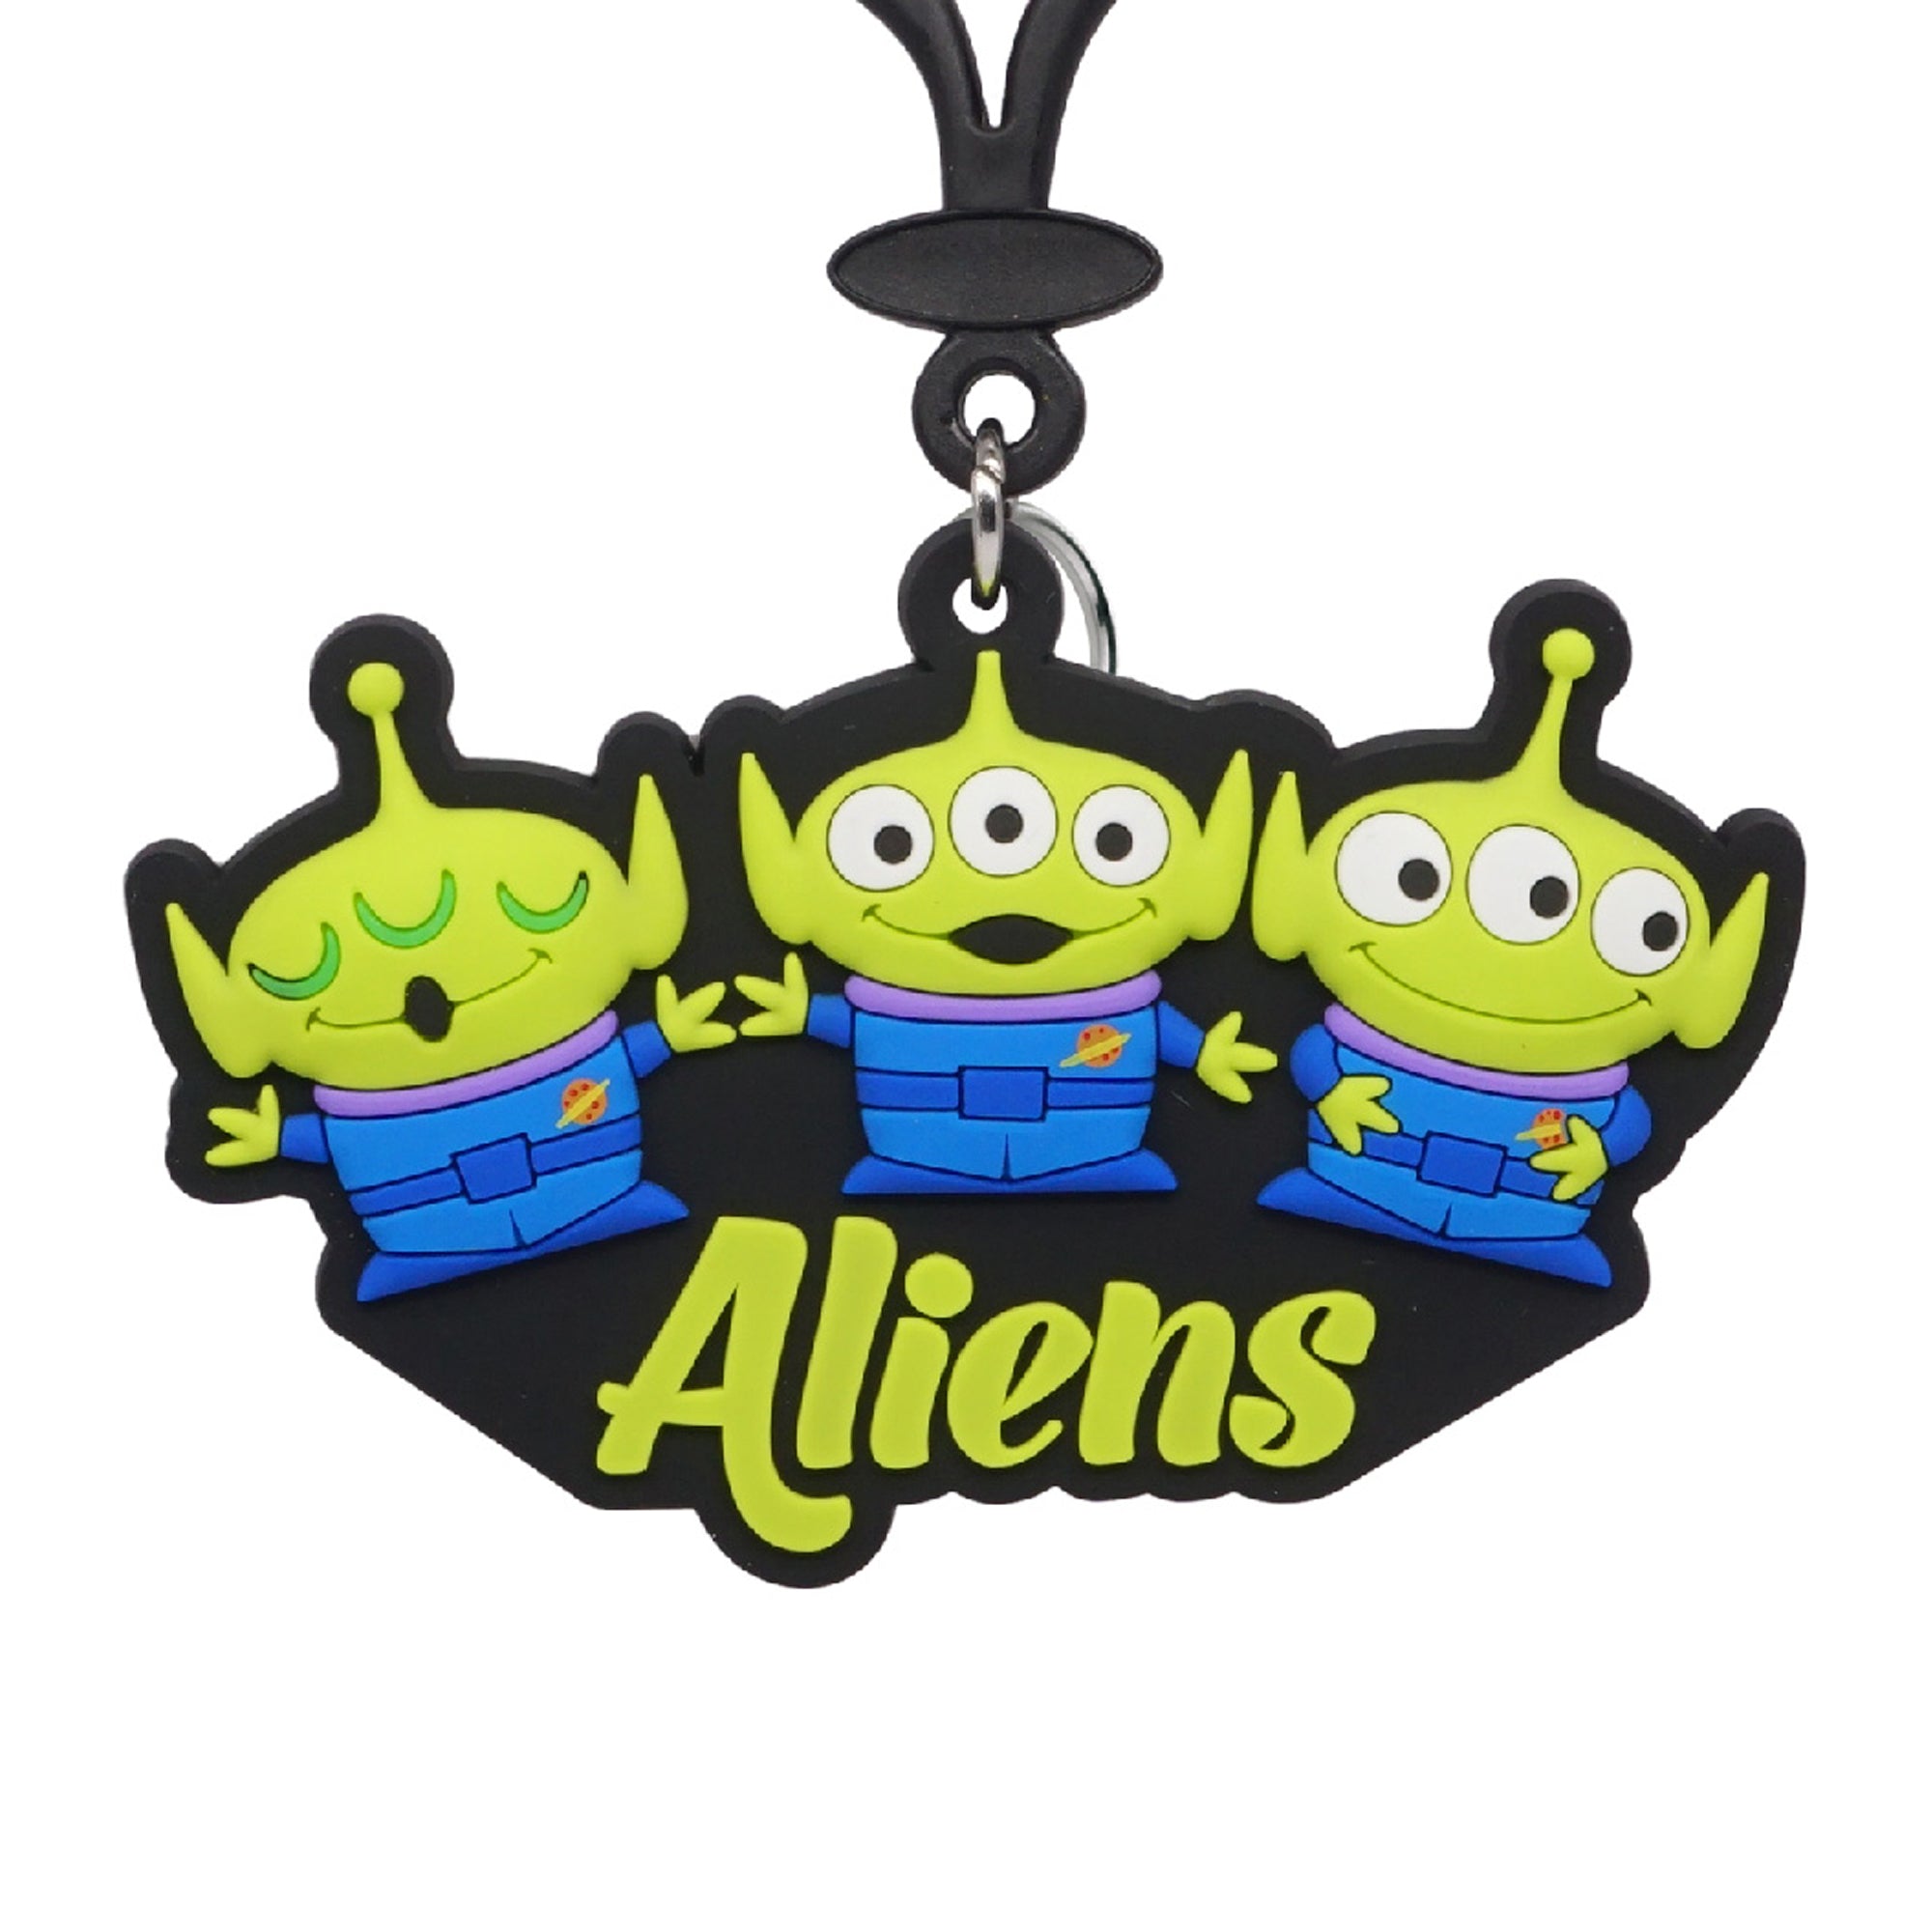 Disney Pixar Toy Story Aliens Collectible Soft Touch Bag Clip/Luggage Charm